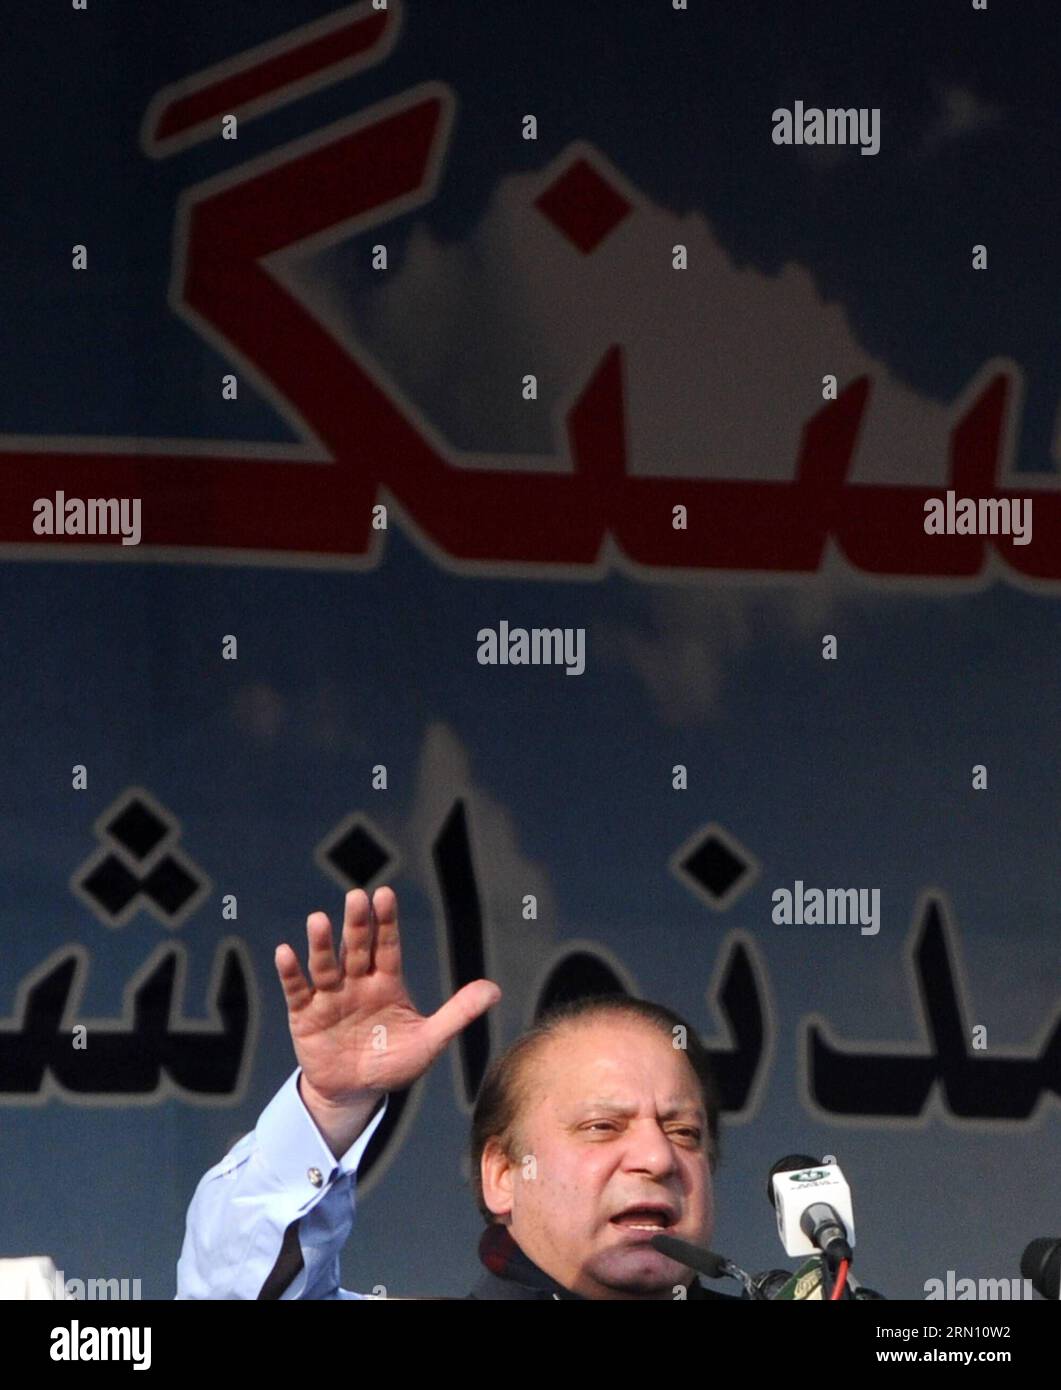 (141129) -- HAVELIAN, Nov. 29, 2014 -- Pakistani Prime Minister Nawaz Sharif addresses during a public meeting in northwest Pakistan s Havelian on Nov. 29, 2014. Pakistani Prime Minister Nawaz Sharif addressing a huge public meeting at Havelian on Saturday said that the multi-dimensional projects being undertaken by PML-N government would make Pakistan an Asian tiger. ) PAKISTAN-HAVELIAN-NAWAZ SHARIF-PUBLIC-MEETING AhmadxKamal PUBLICATIONxNOTxINxCHN   Nov 29 2014 Pakistani Prime Ministers Nawaz Sharif addresses during a Public Meeting in Northwest Pakistan S  ON Nov 29 2014 Pakistani Prime Min Stock Photo